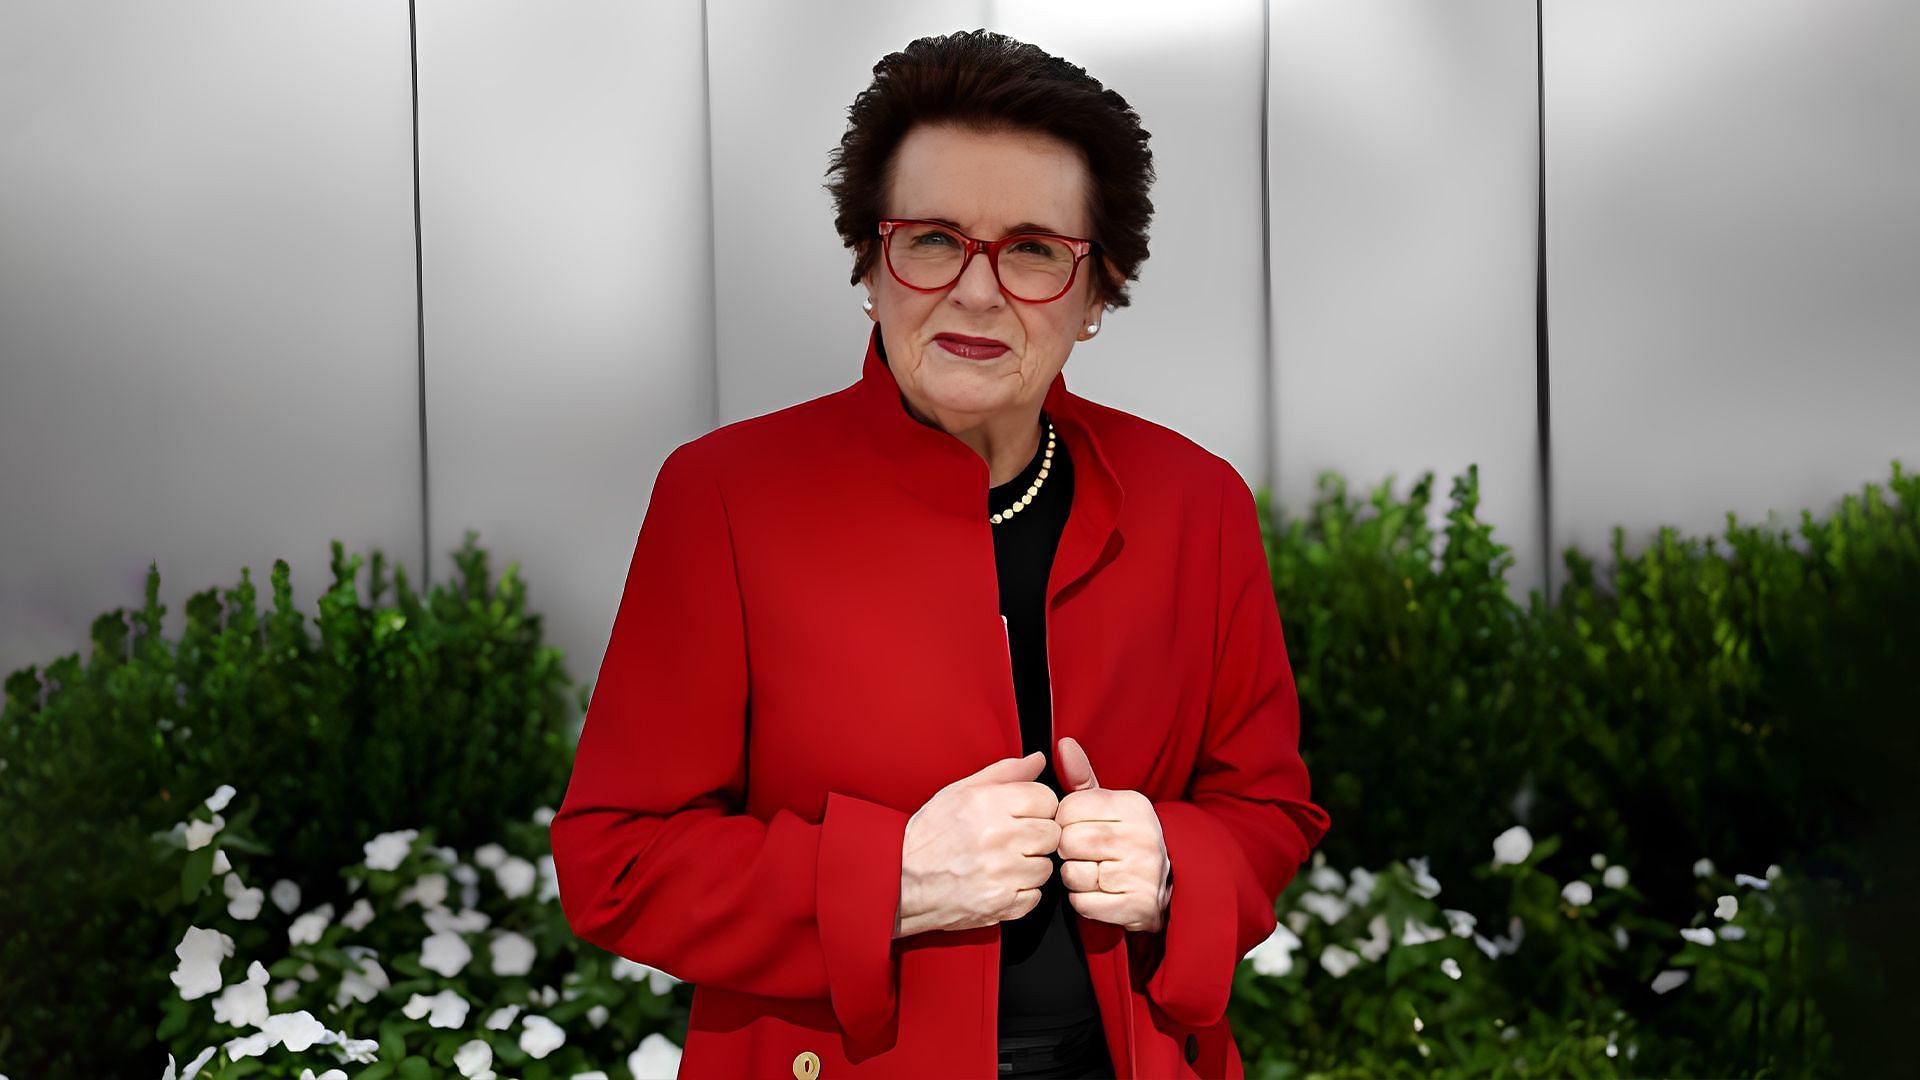 Billie Jean King pays a glowing tribute to the Greensboro Four